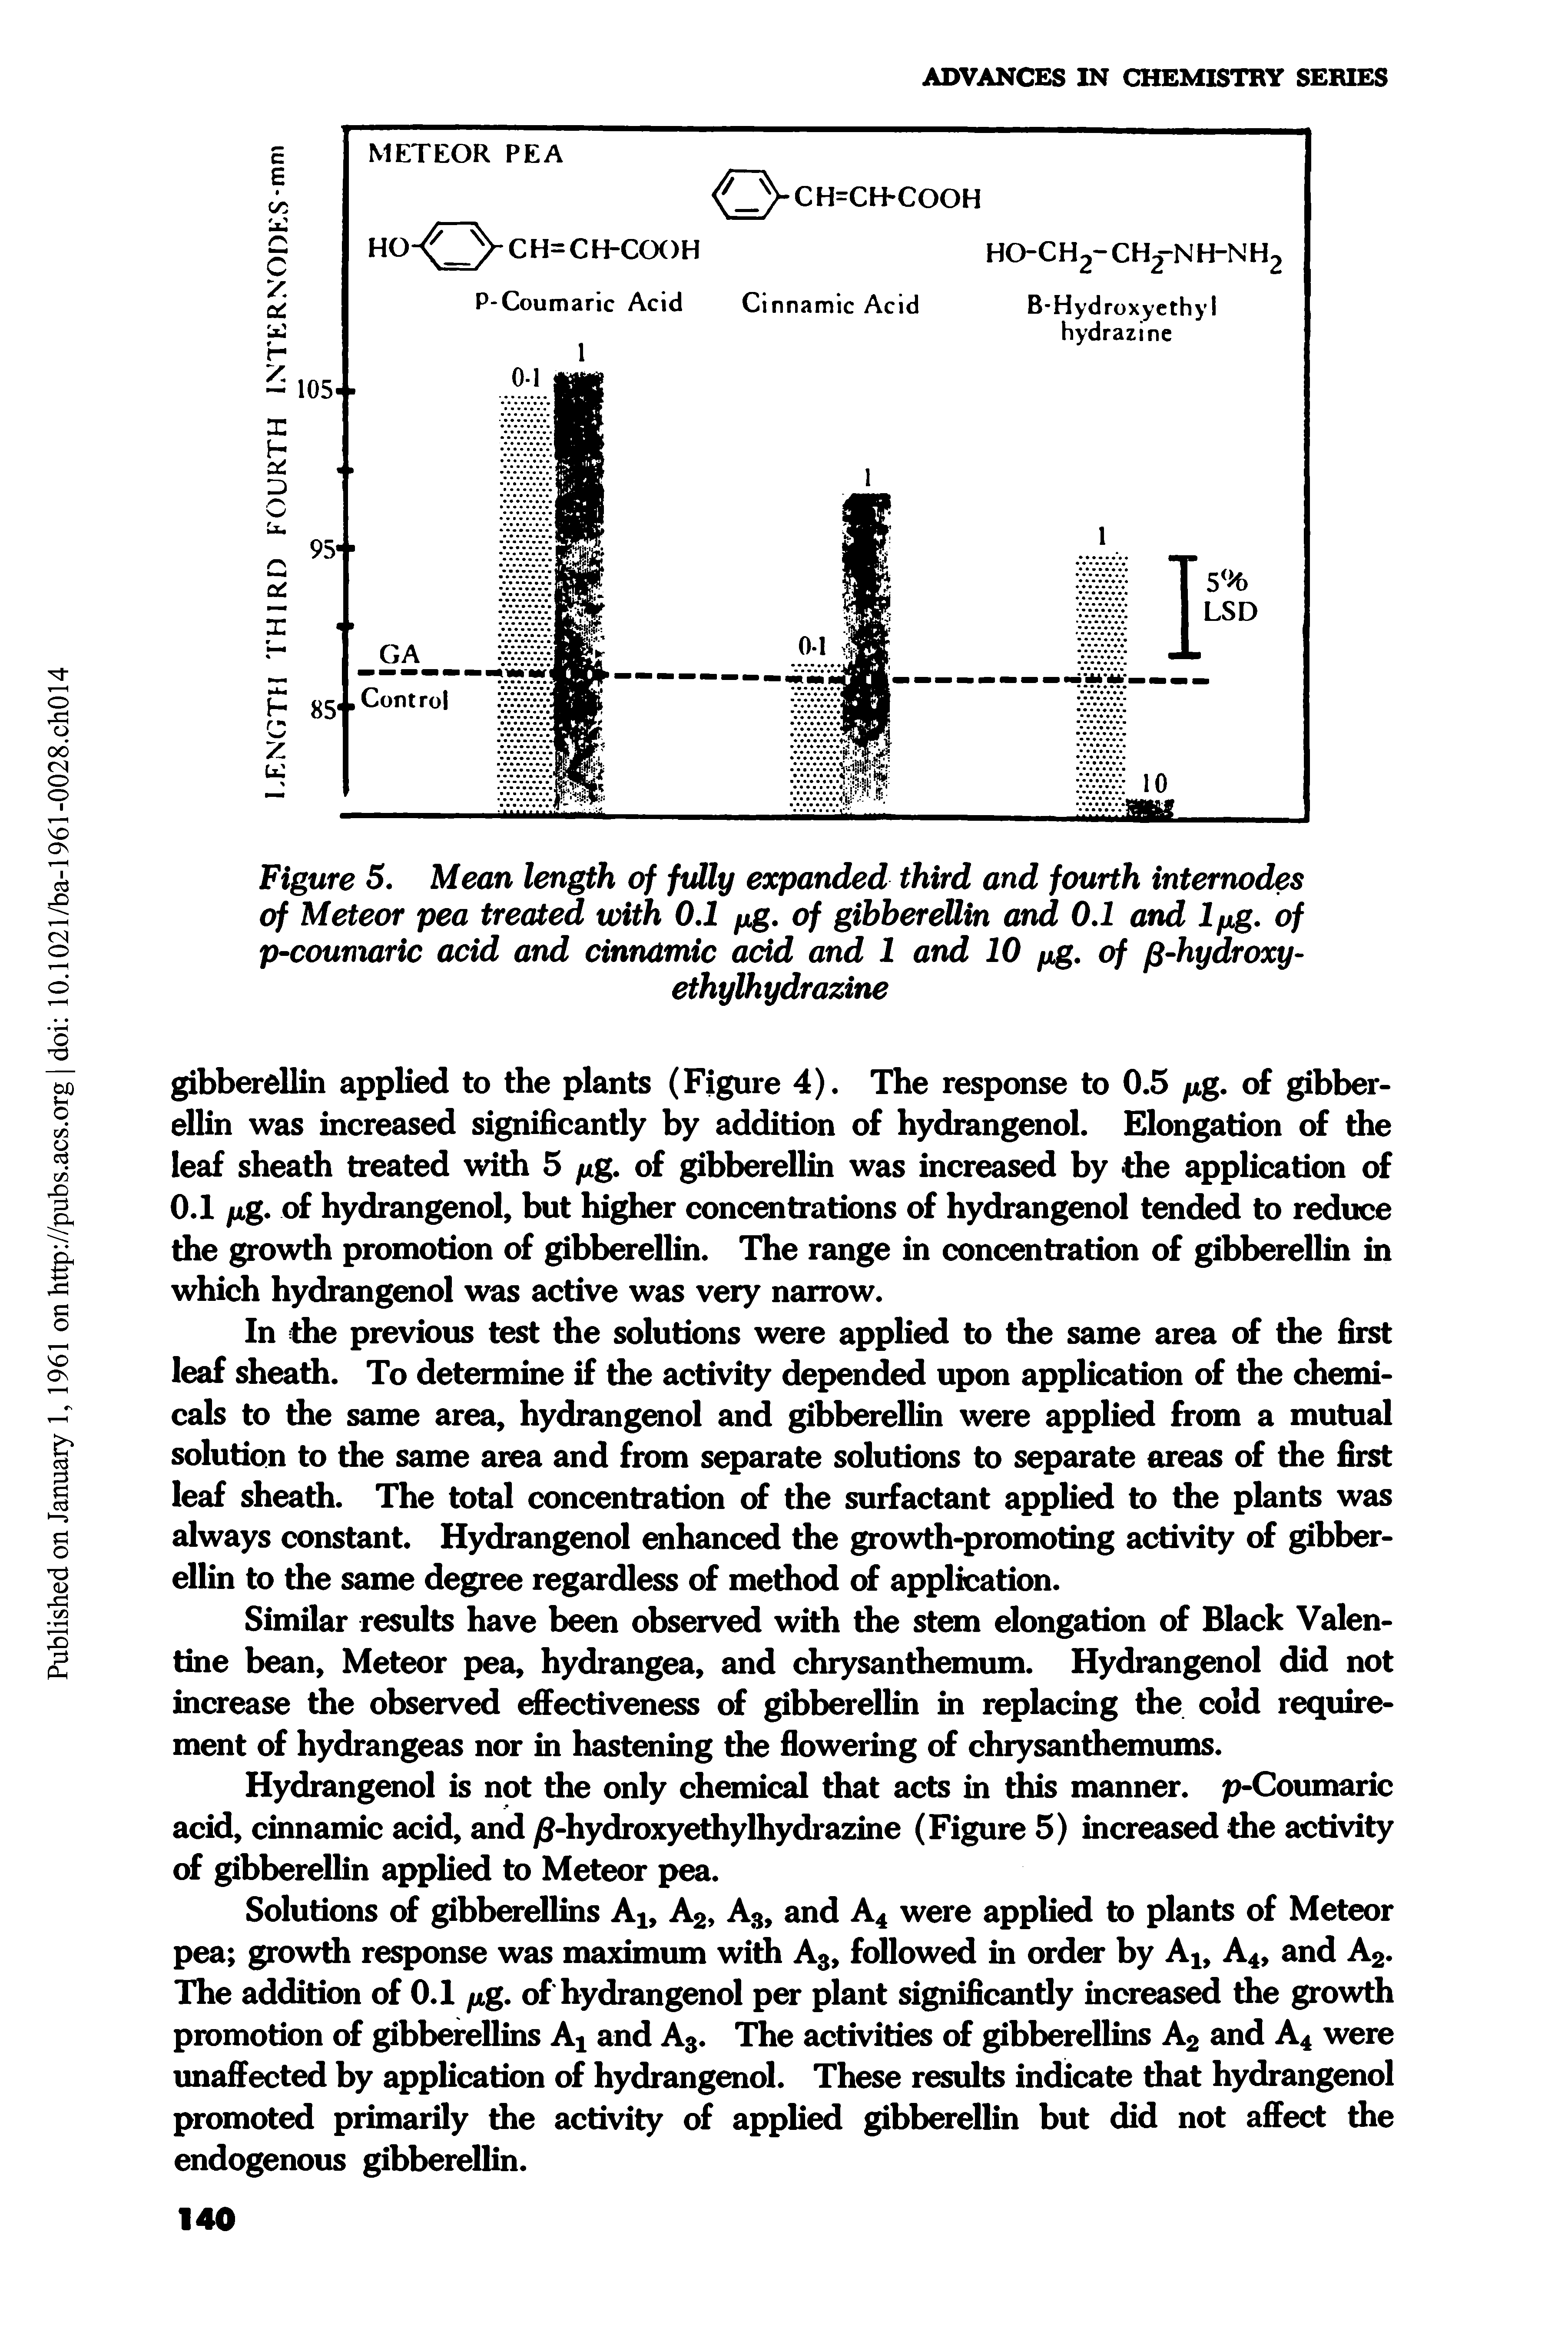 Figure 5. Mean length of fully expanded third and fourth internodes of Meteor pea treated with 0.1 fig. of gibberellin and 0.1 and lfig. of p-coumaric acid and cinnamic add and 1 and 10 fig. of fi-hydroxy-...